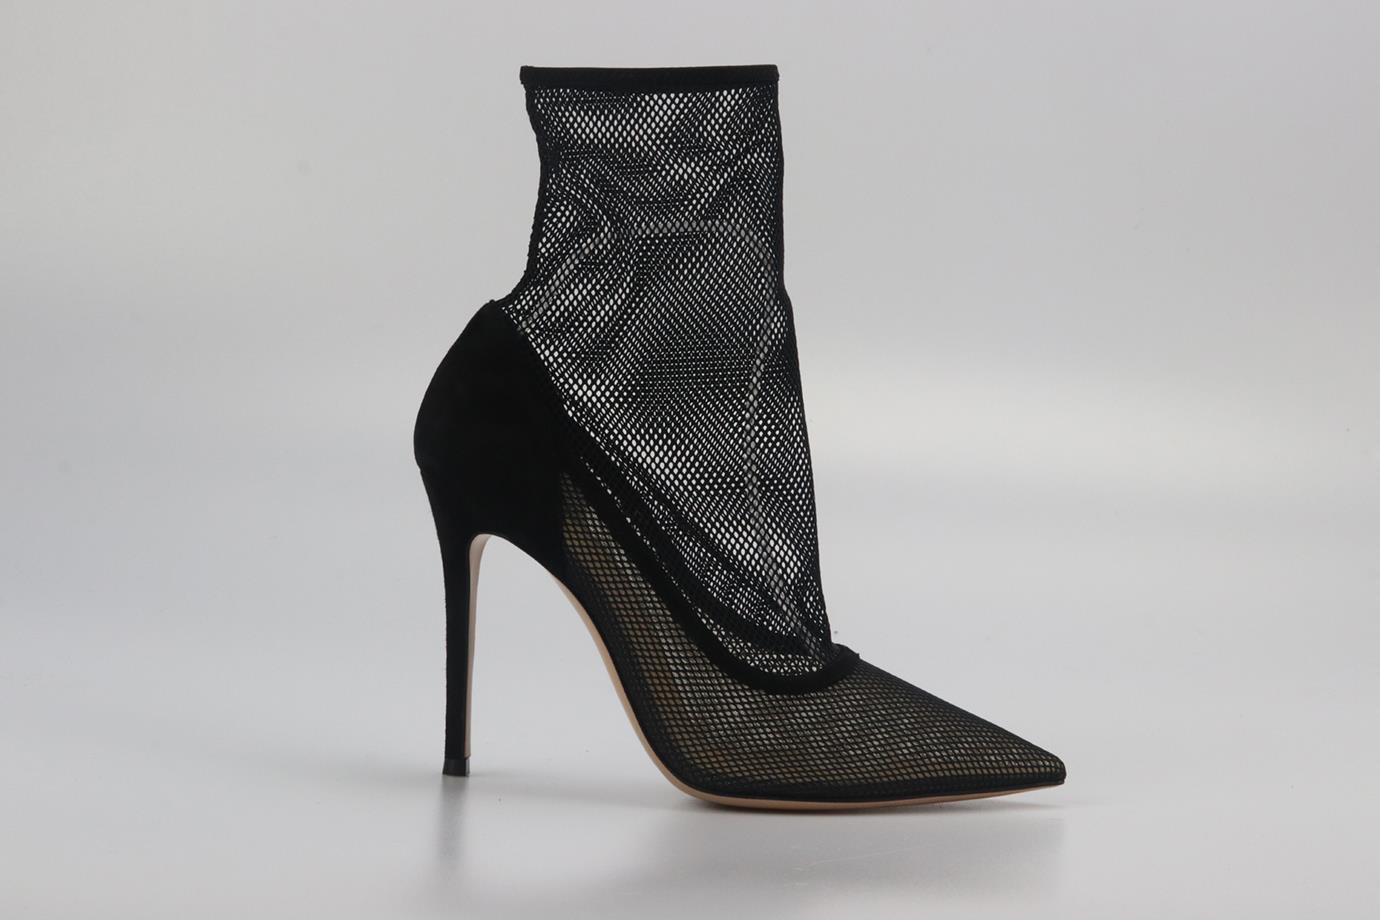 Gianvito Rossi Stretch Mesh And Suede Ankle Boots. Black. Pull on. Does not come with - dustbag or box. EU 39 (UK 6, US 9). Insole: 9.8 in. Heel Height: 3.4 In. Condition: New without box.
